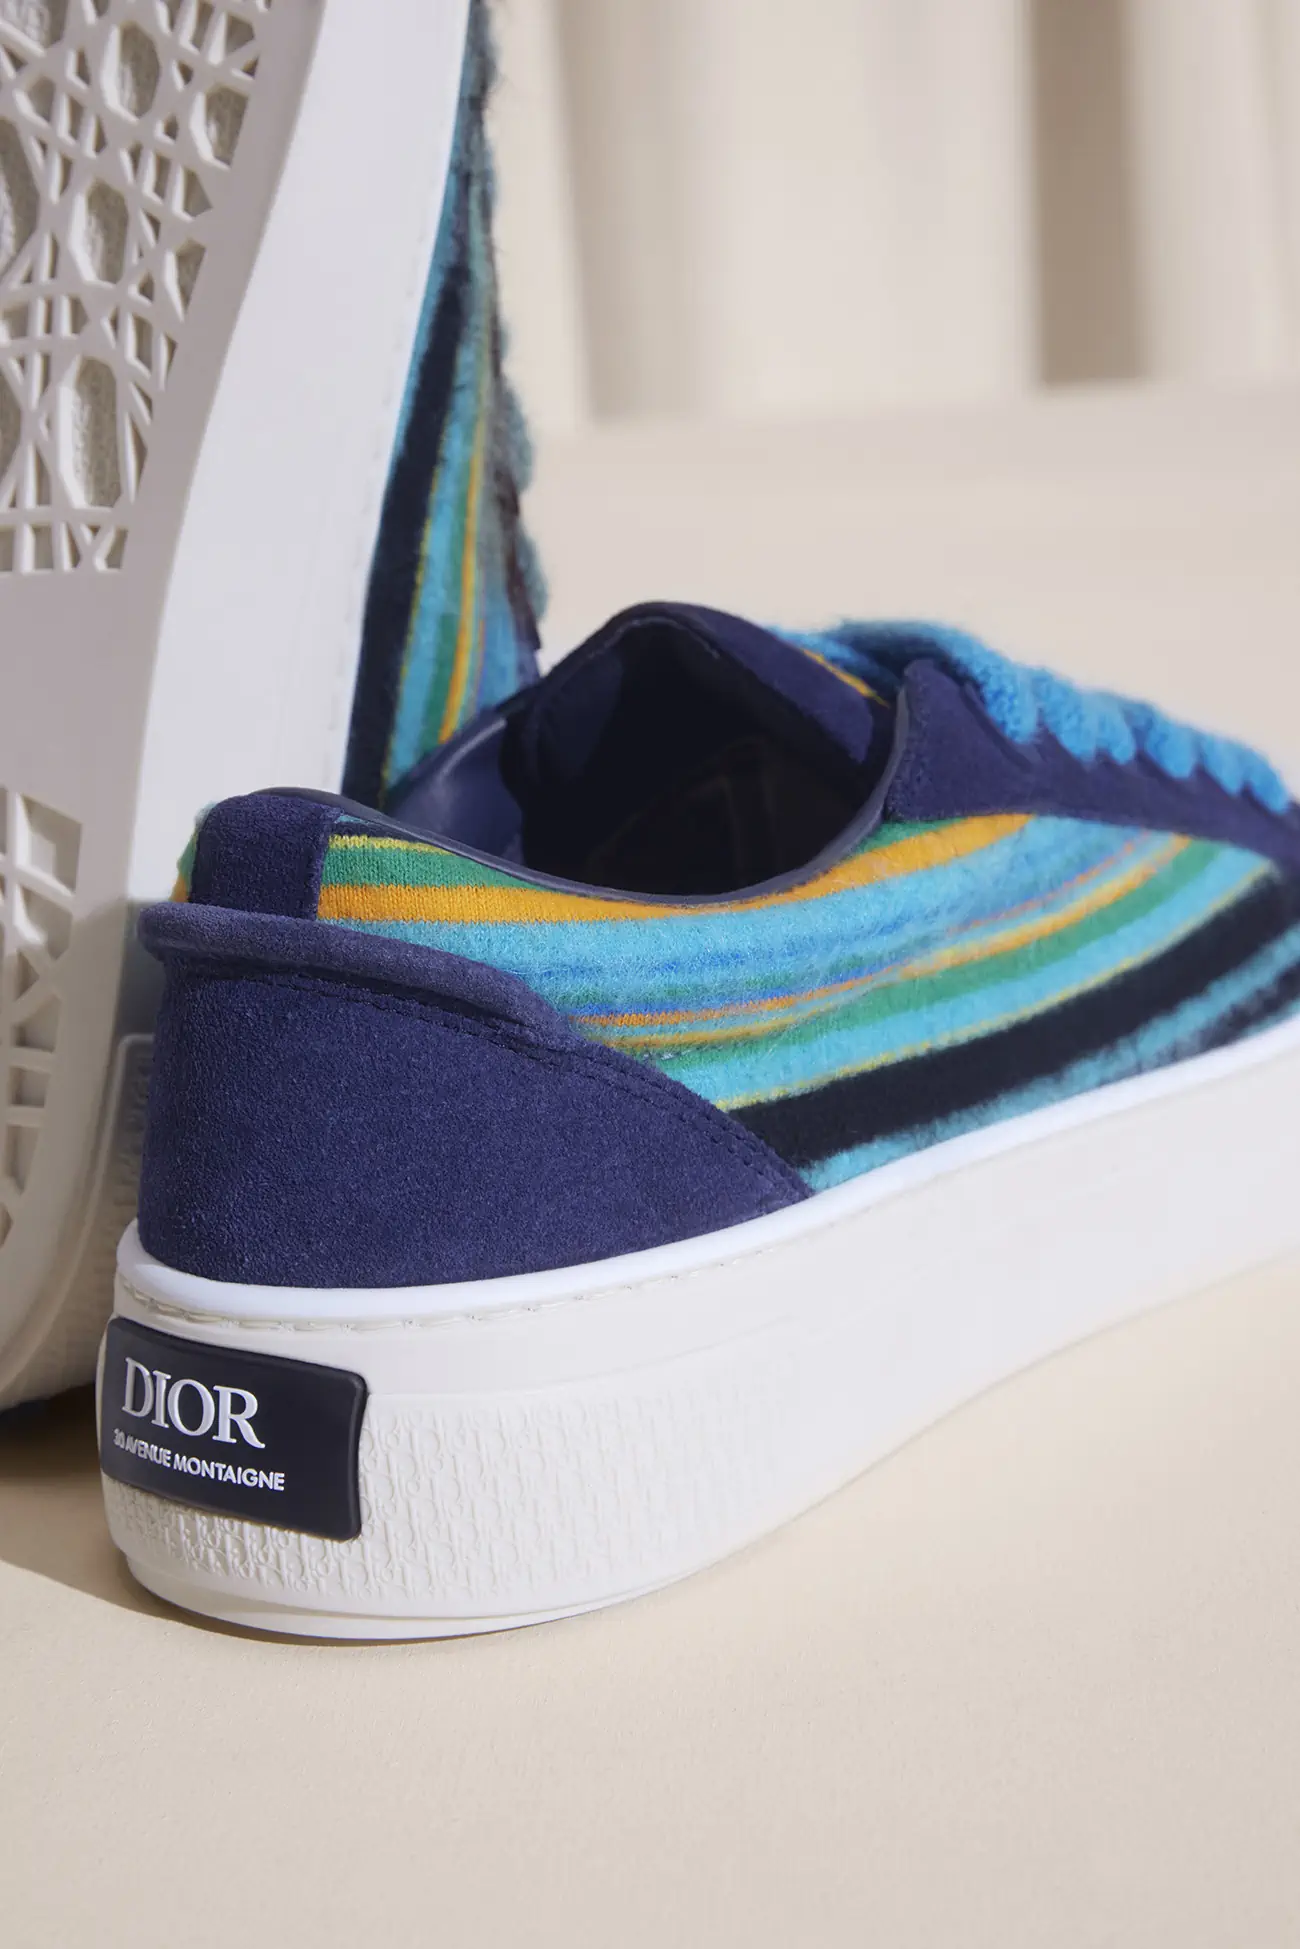 Dior B33, the first Dior sneakers to feature an encrypted key with exclusive new services